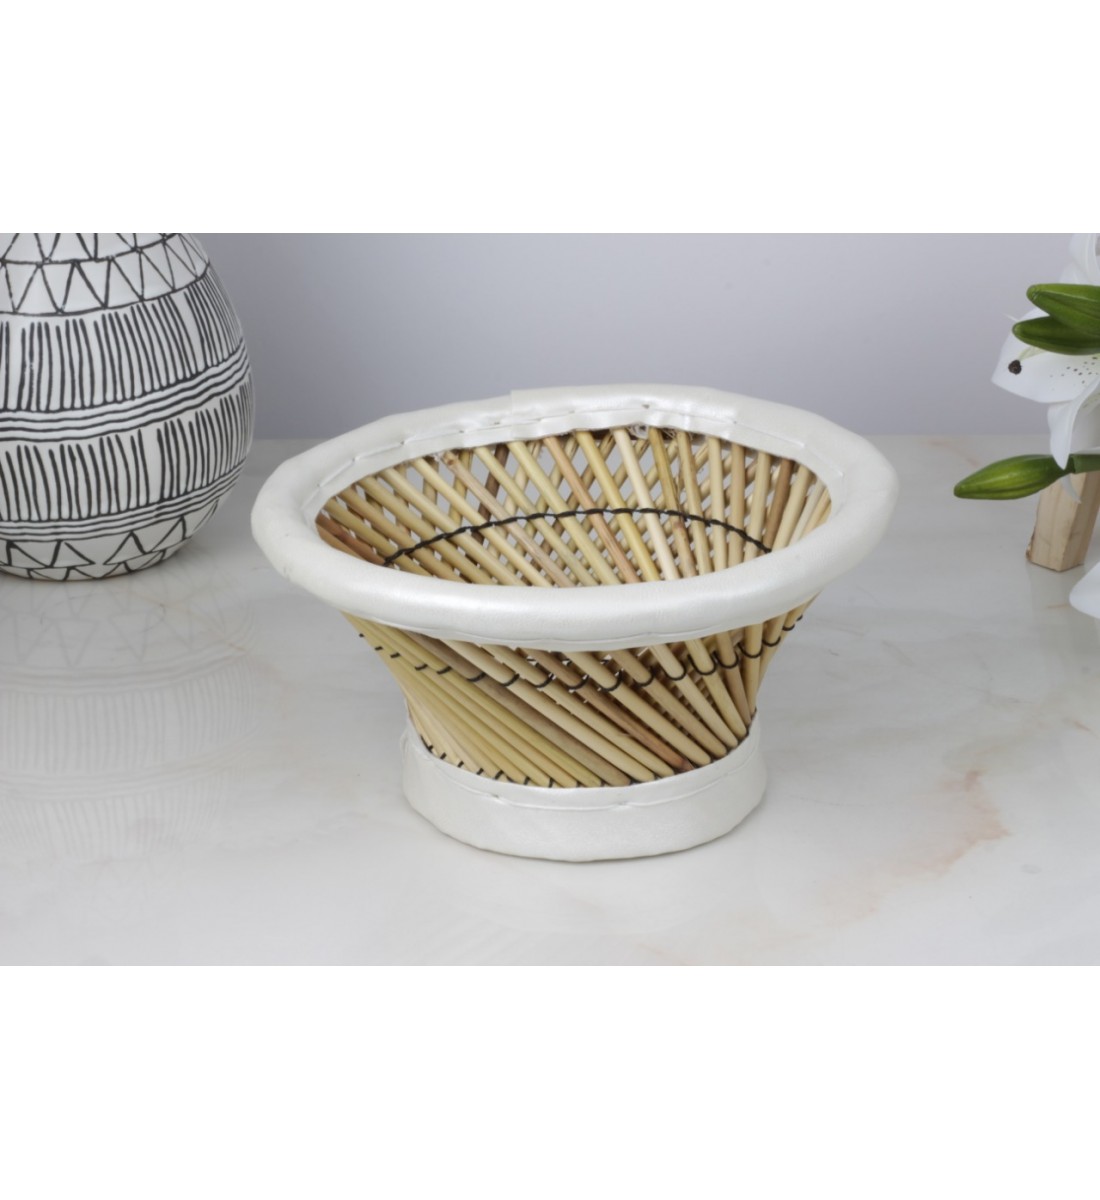 Wicker basket - with handle